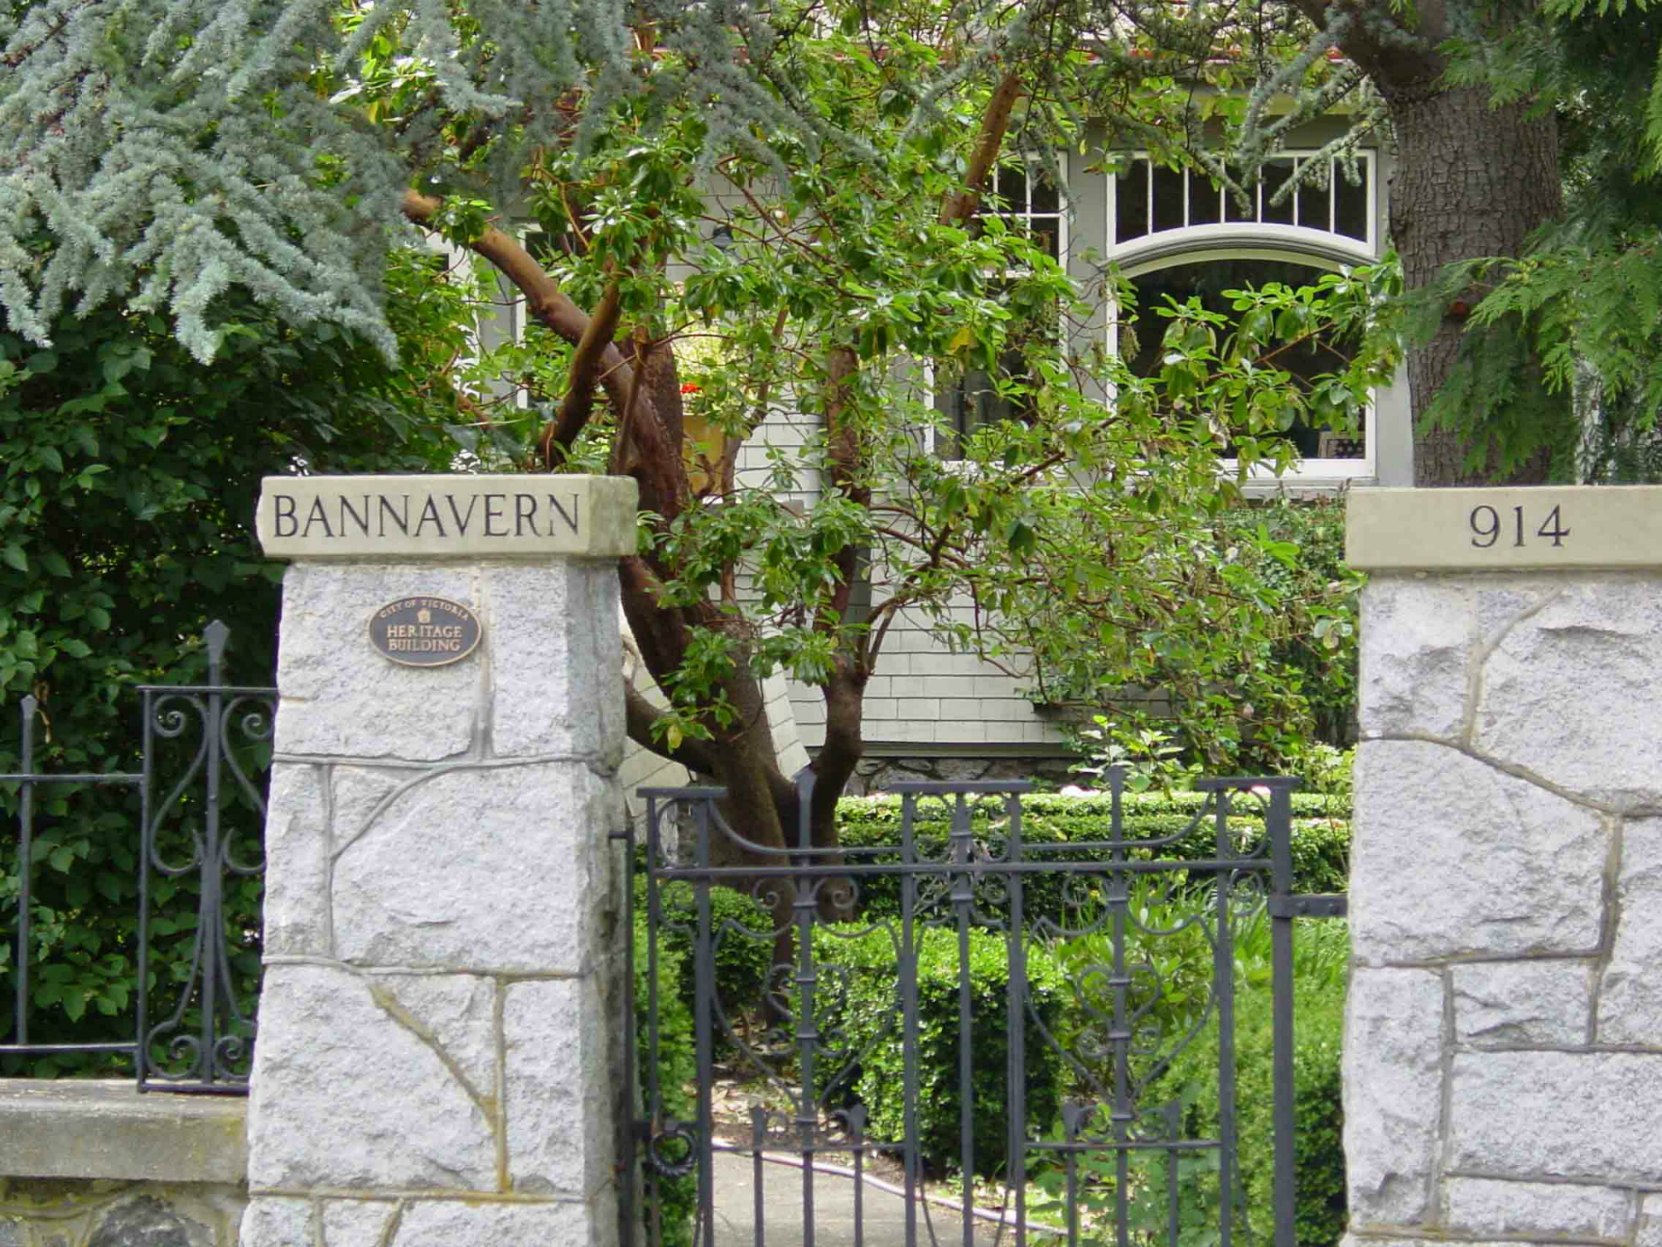 The gate of Bannavern, 914 St. Charles Street, designed by architect Percy Leonard James in 1910.